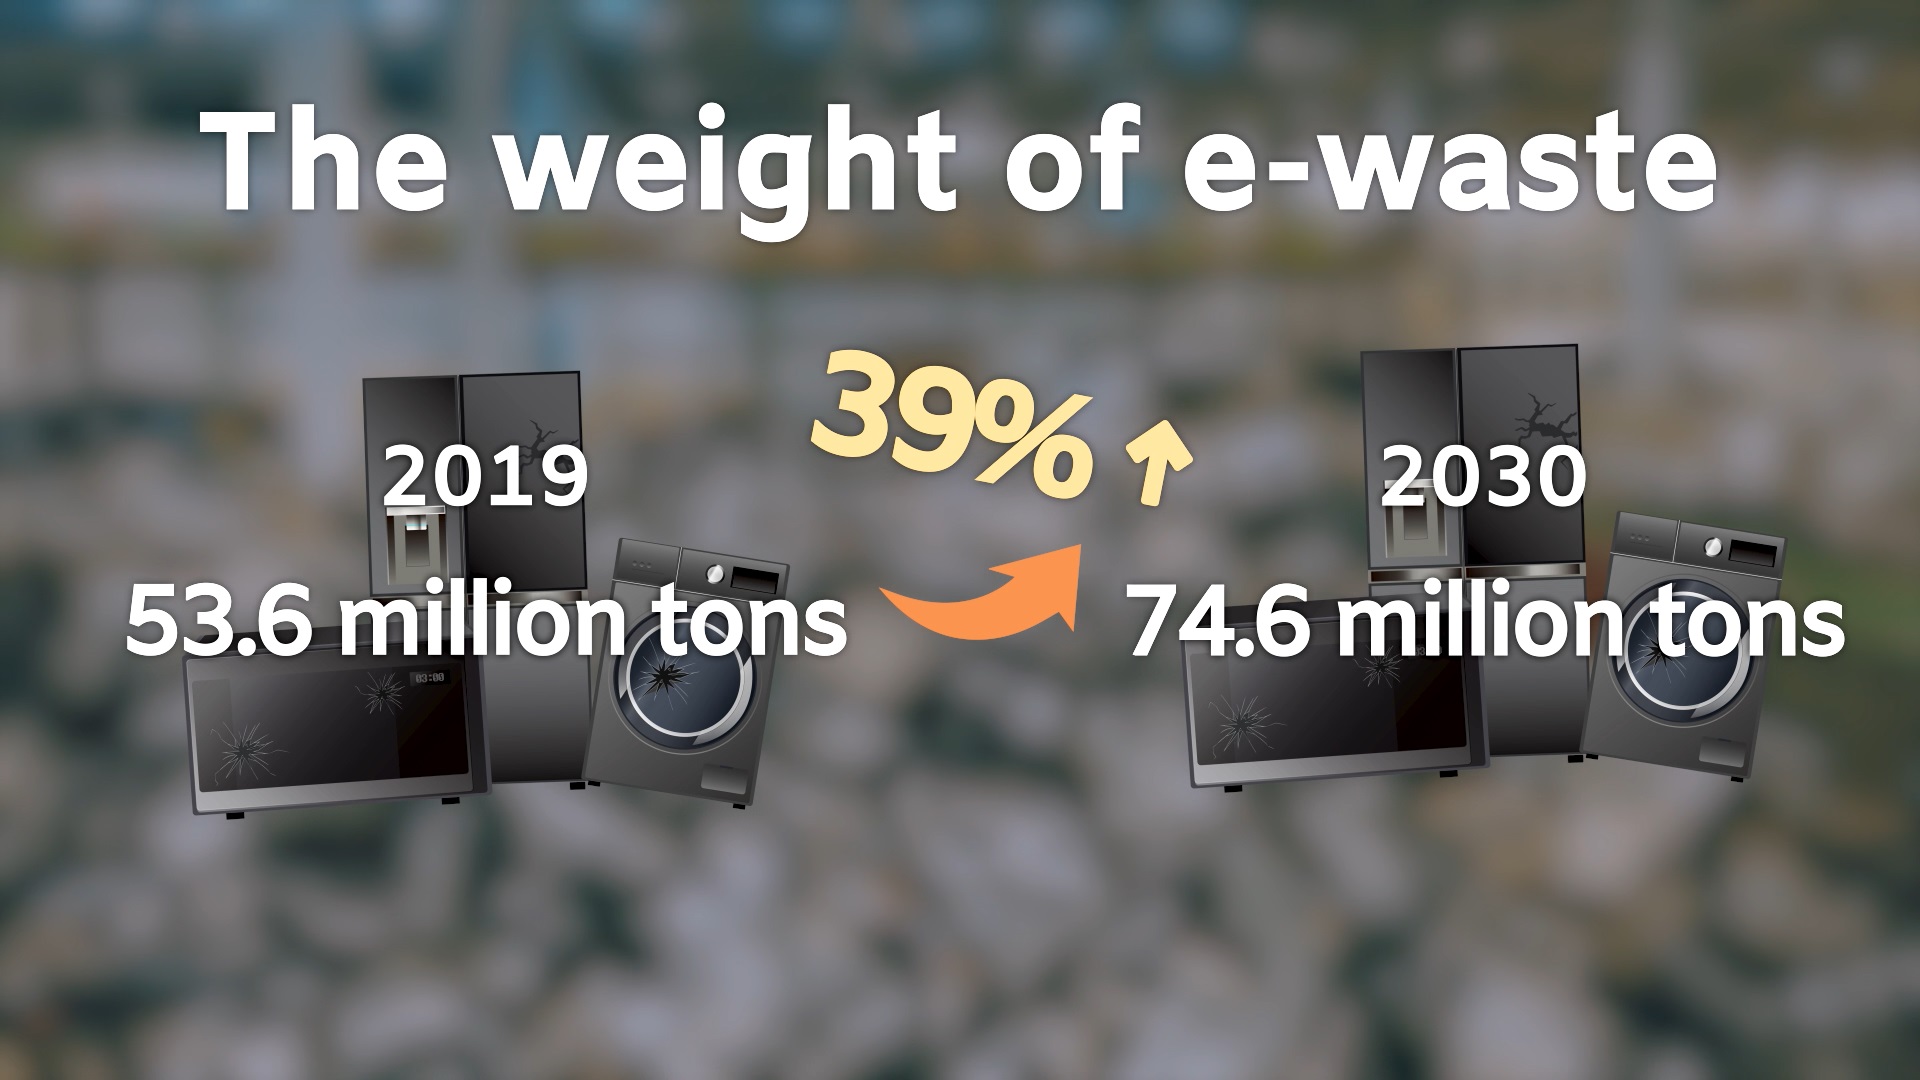 A screenshot from LG's YouTube video explaining how the weight of e-waste is set to increase 39% from 2019 to 2030.